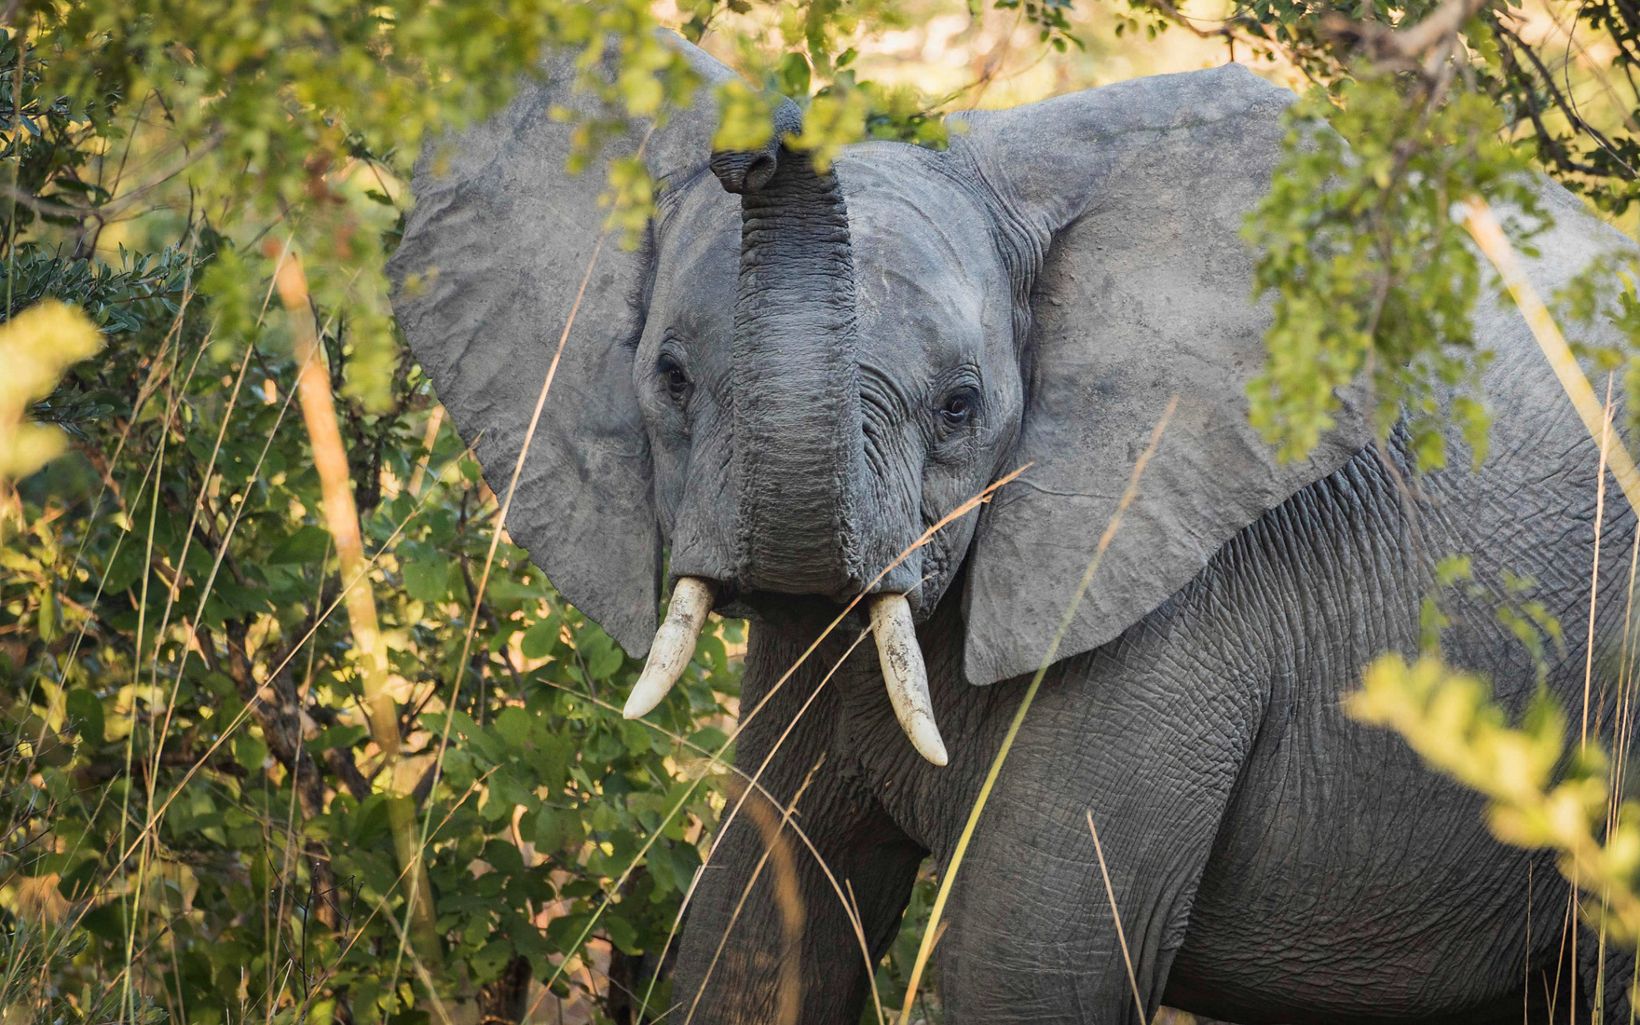 An elephant raises its trunk in Ngoma Forest at Kafue National Park in Zambia.